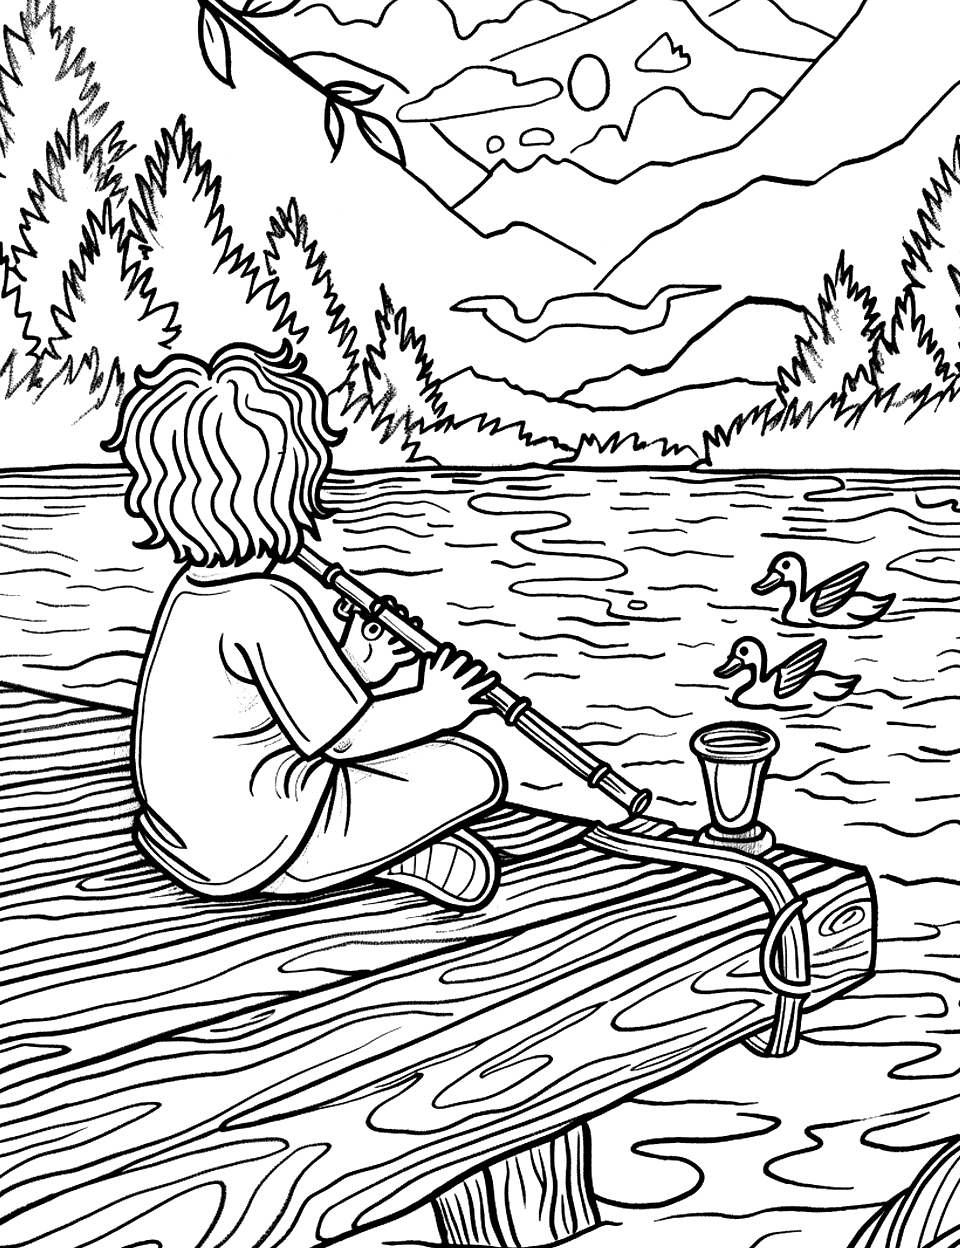 Flute Melody by the Lake Music Coloring Page - A child sitting on a dock, playing a flute with ducks swimming nearby.